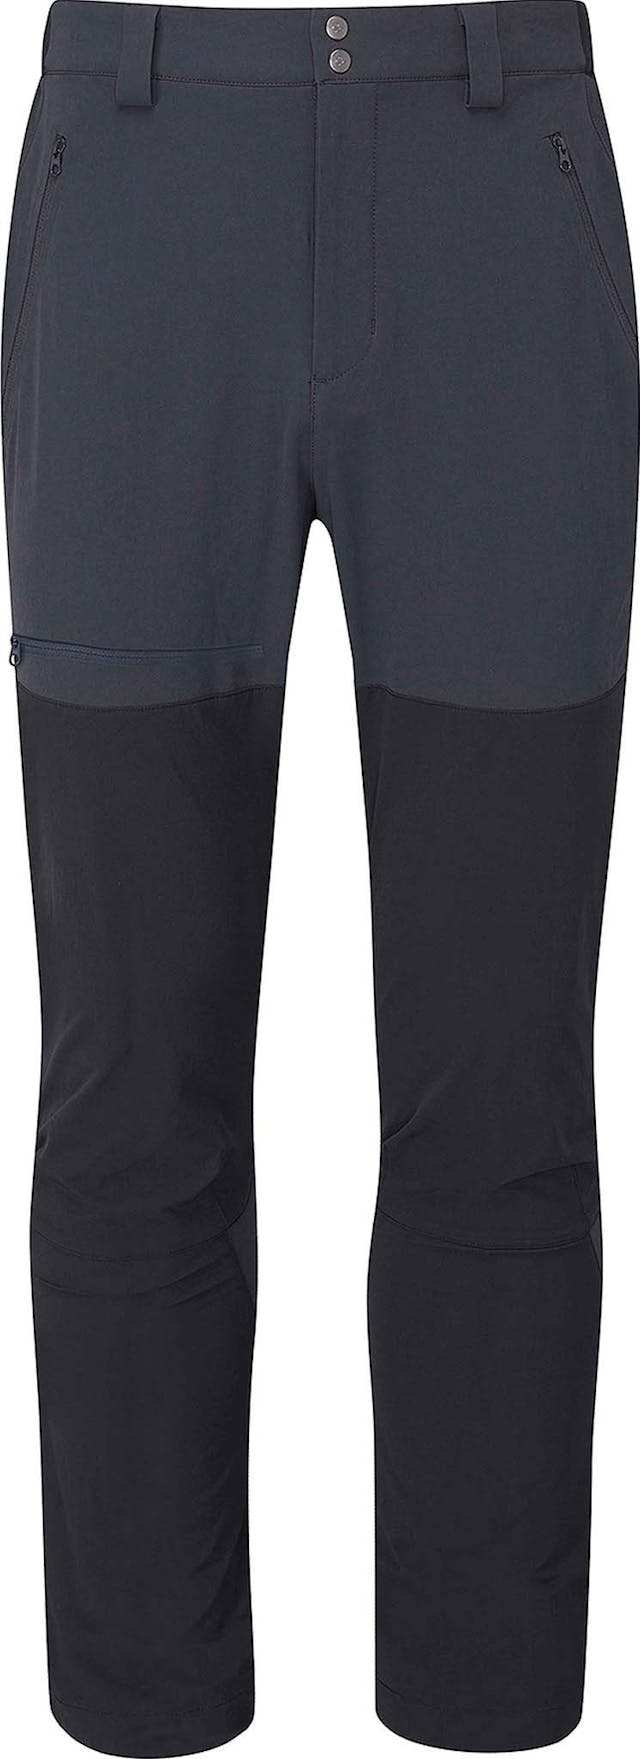 Product image for Torque Mountain Pants - Men's